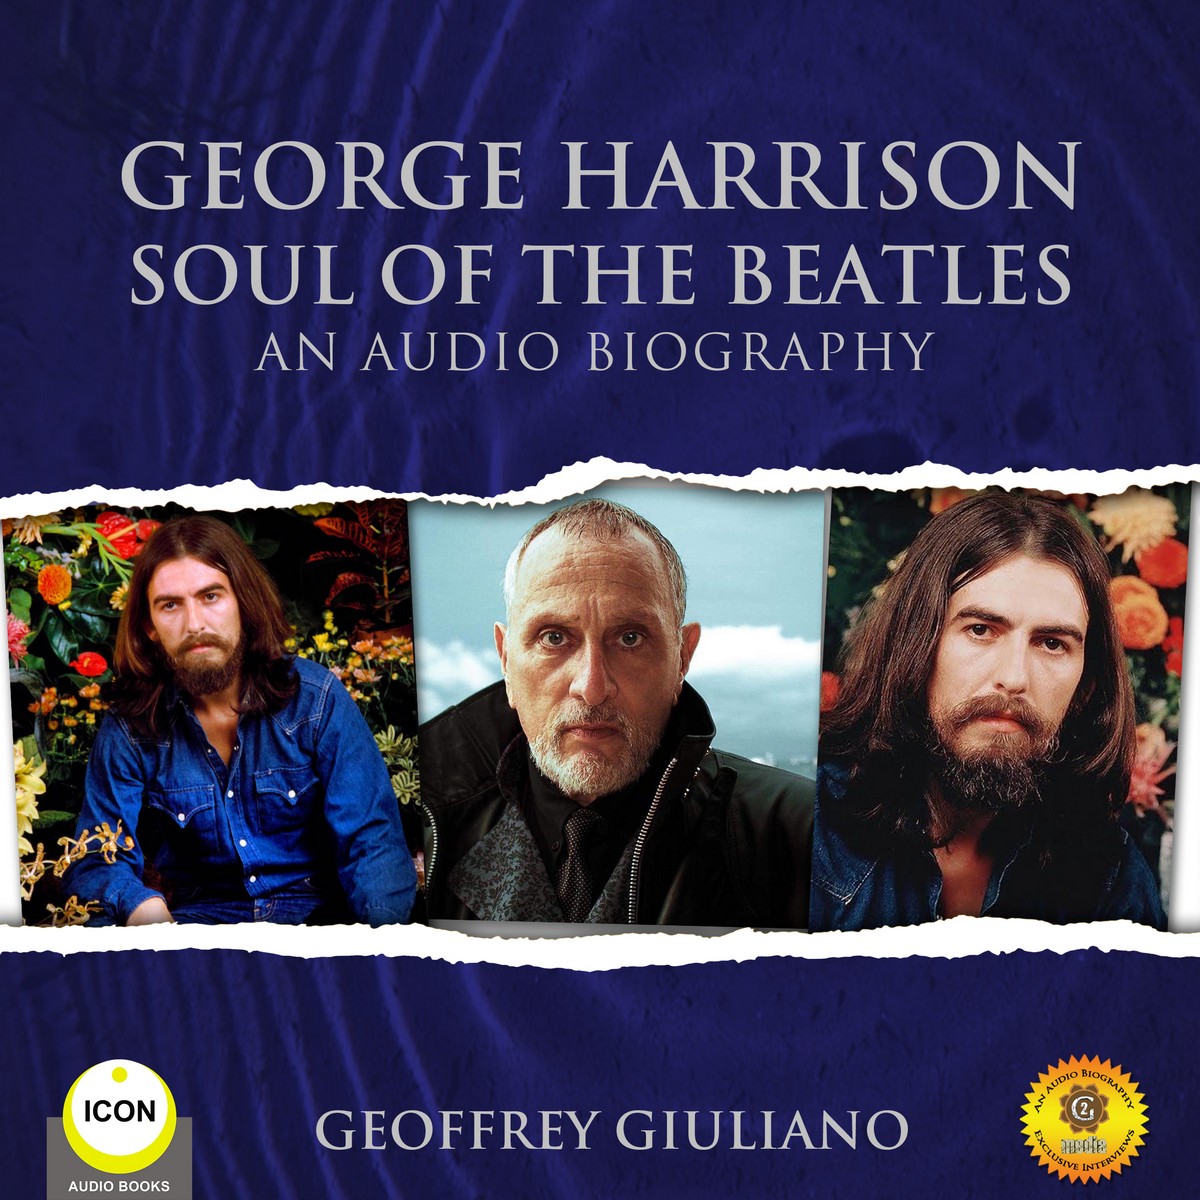 George Harrison Soul of the Beatles – An Audio Biography